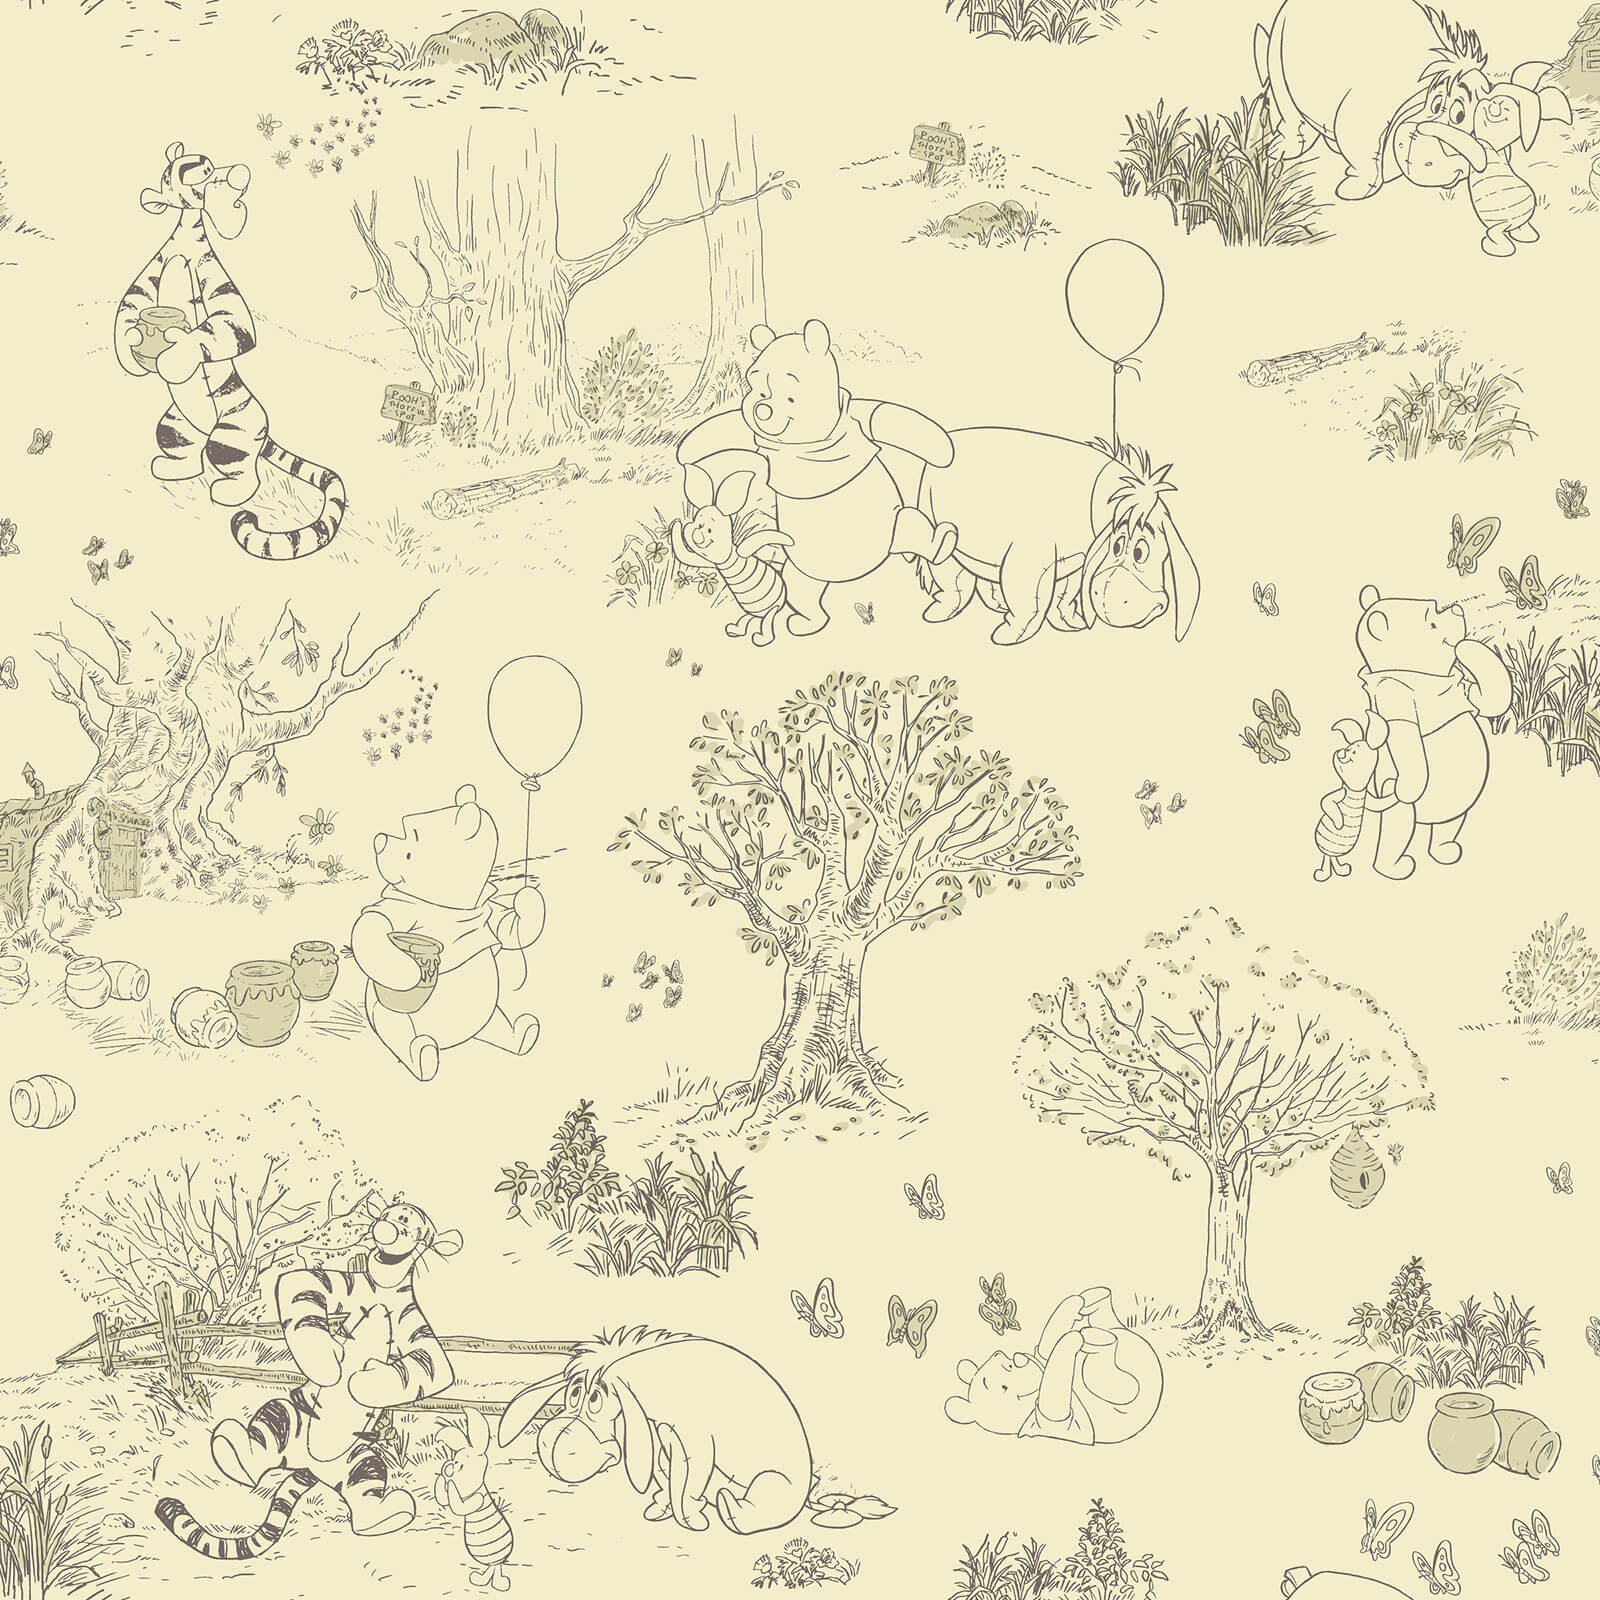 Classic Winnie The Pooh Wallpapers